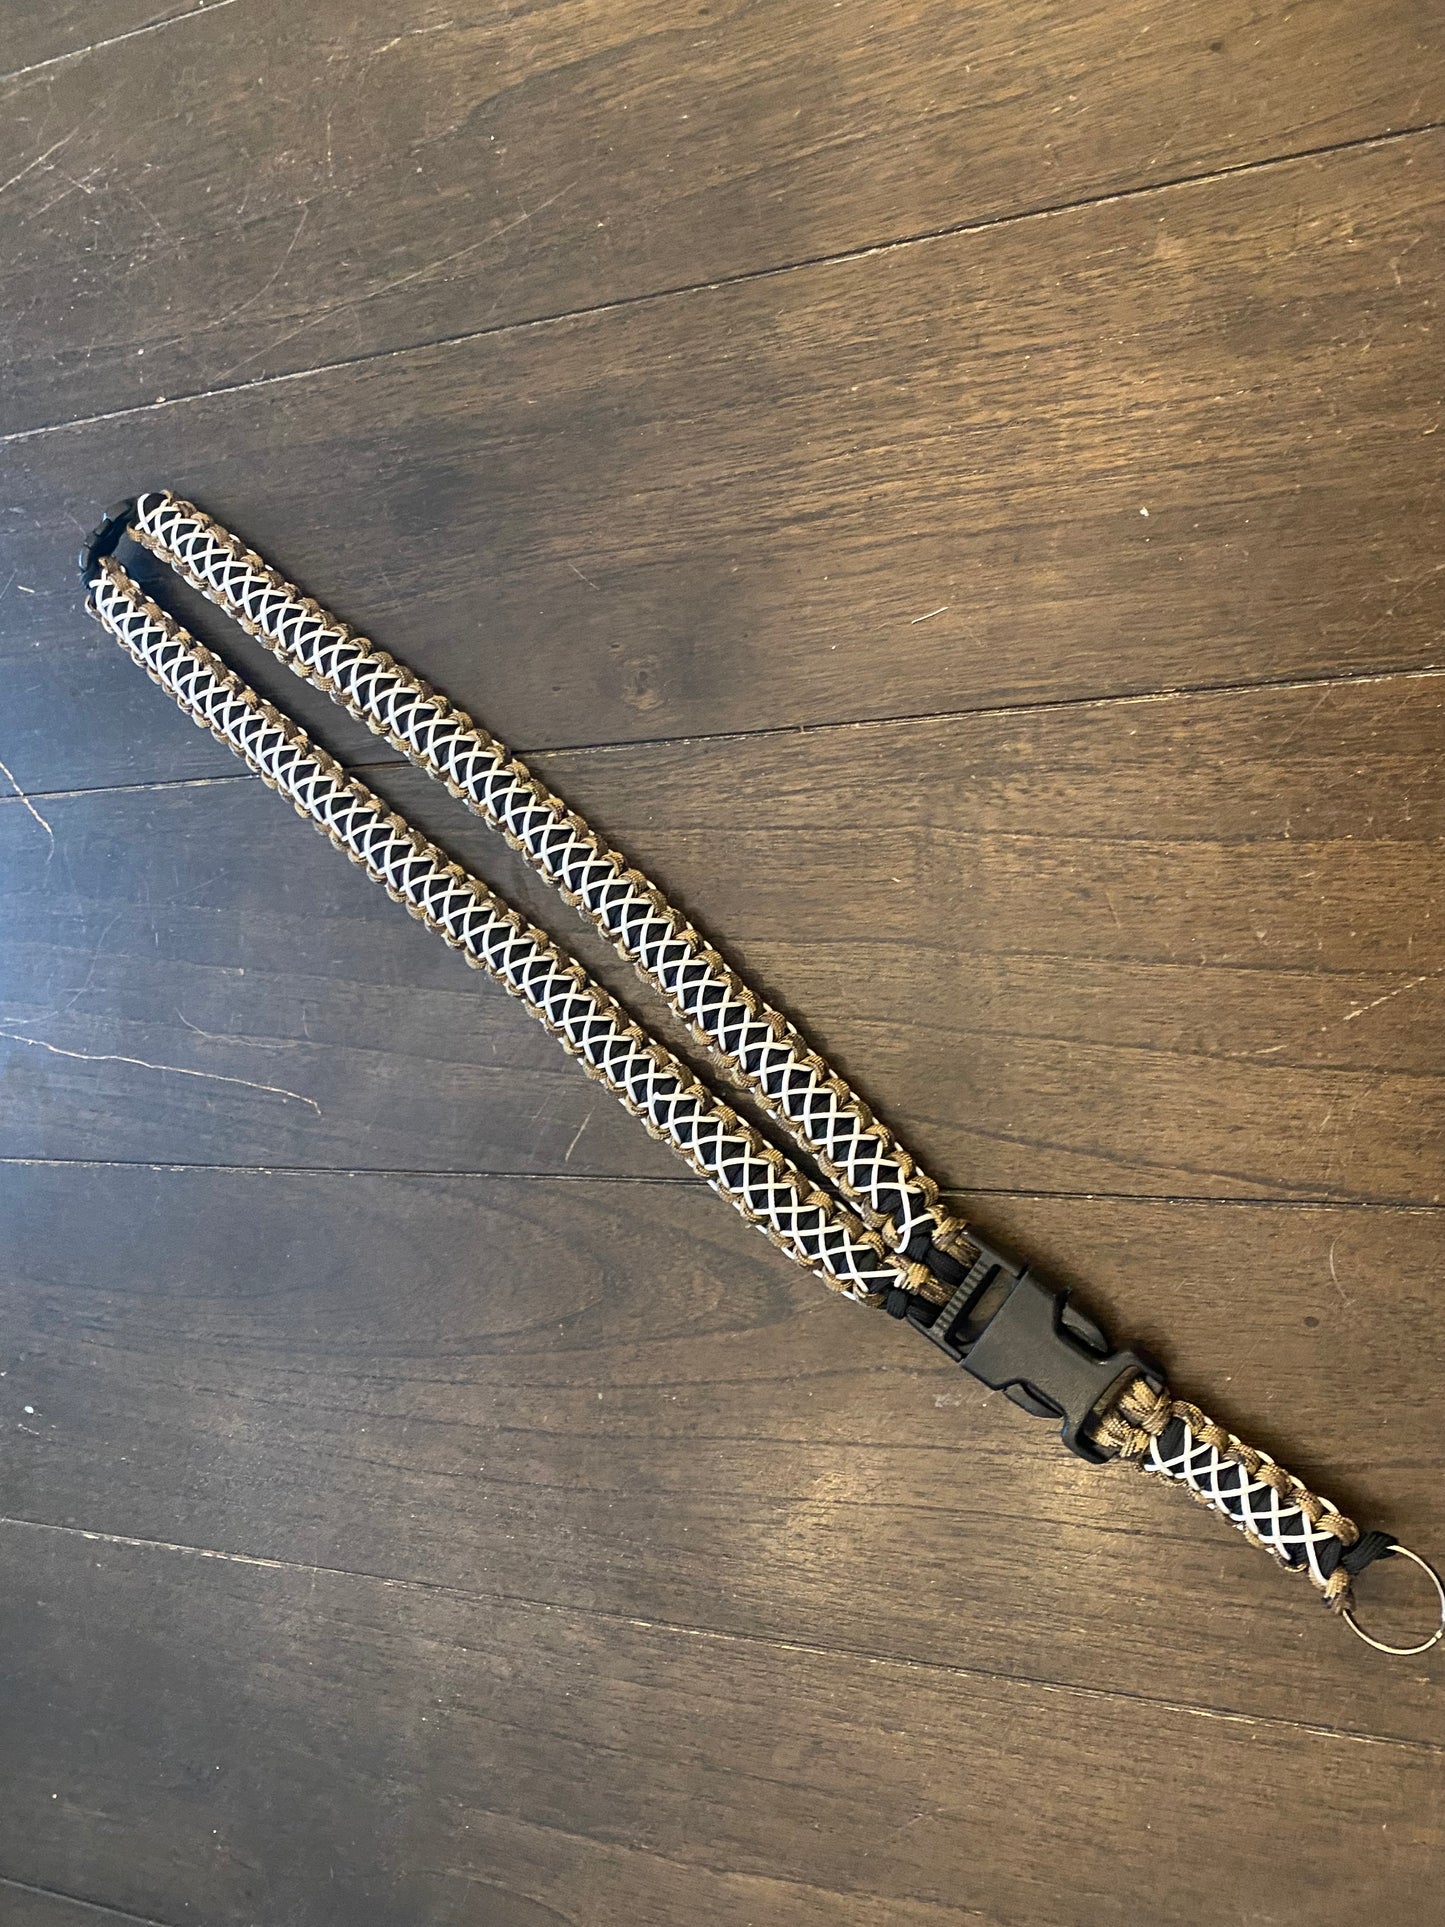 Premade Paracord Laced Cobra Lanyard, FDE Camo, Black, and Glow-in-the-dark microcord